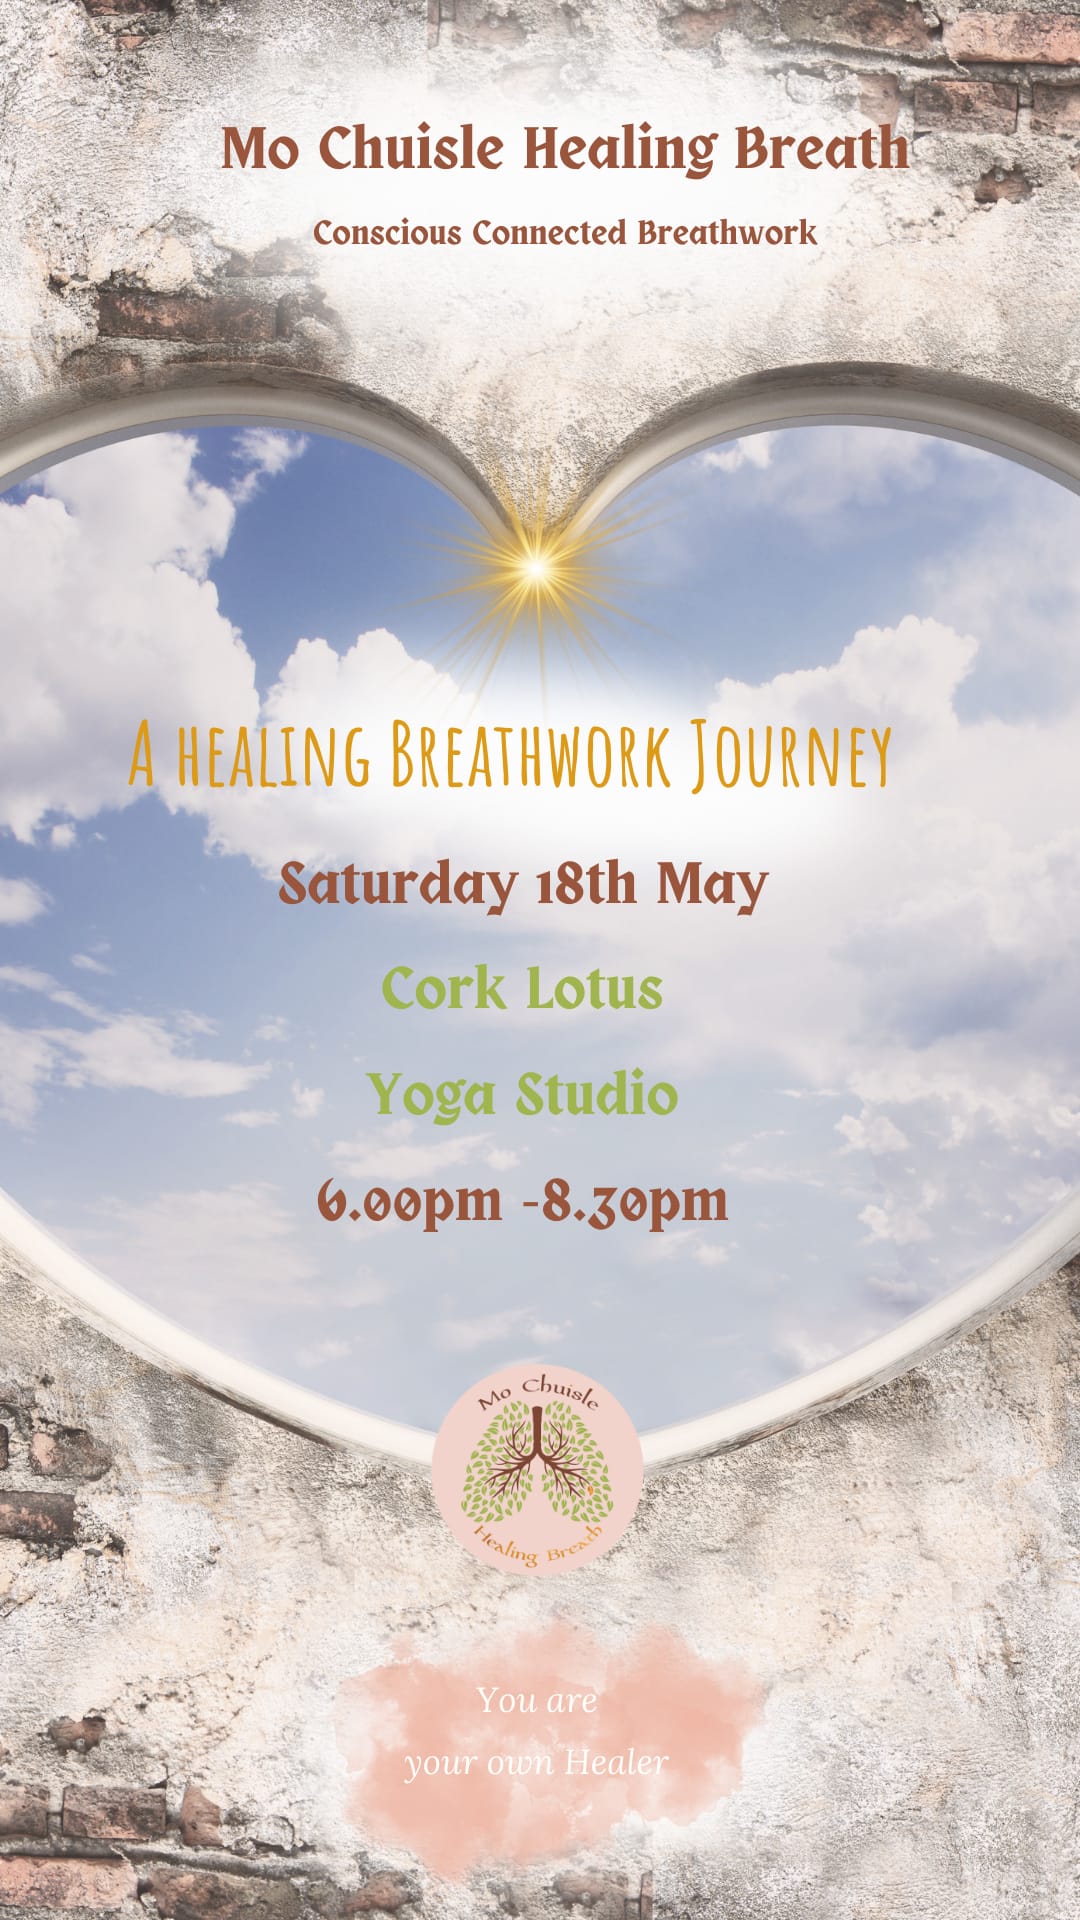 A Healing Breathwork Journey - Conscious Connected Breath